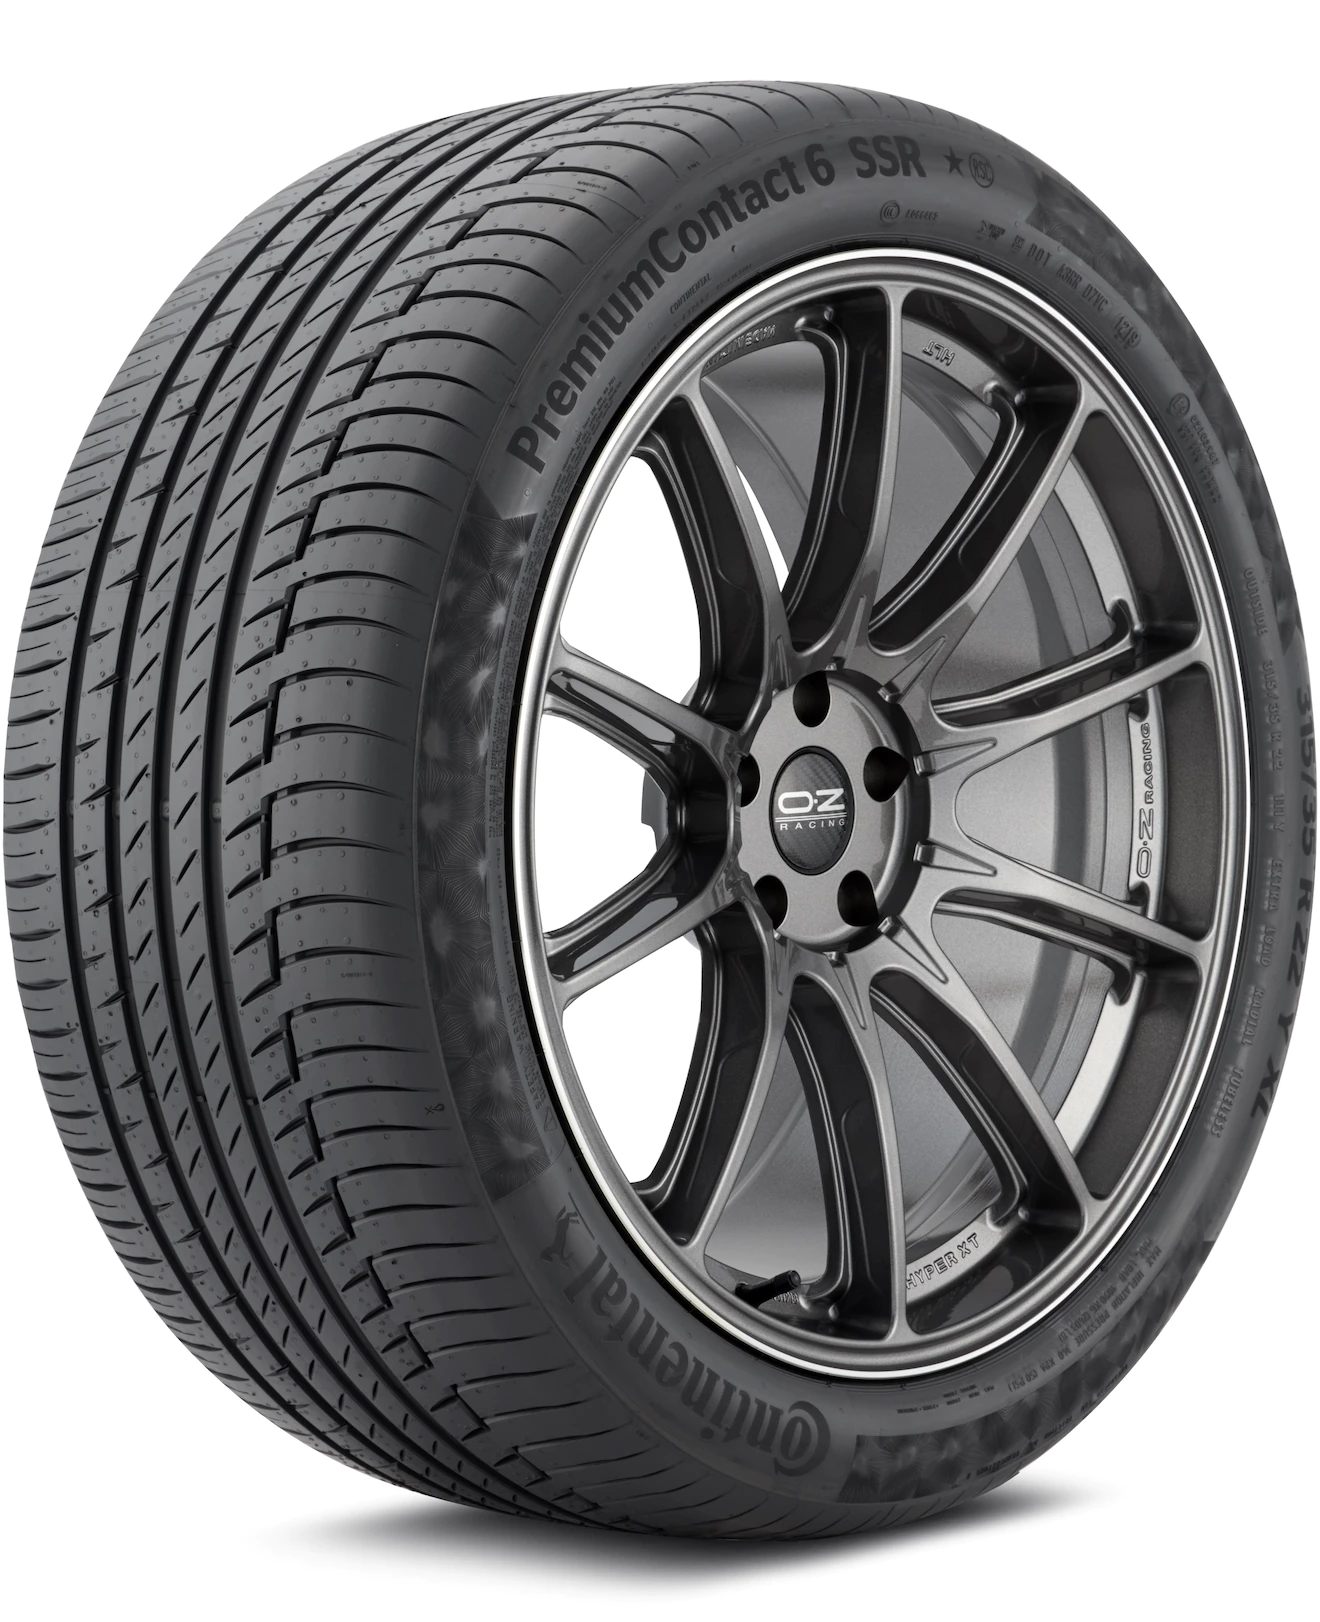 Continental PremiumContact 6 275/35 R20 102Y XL RunFlat FP